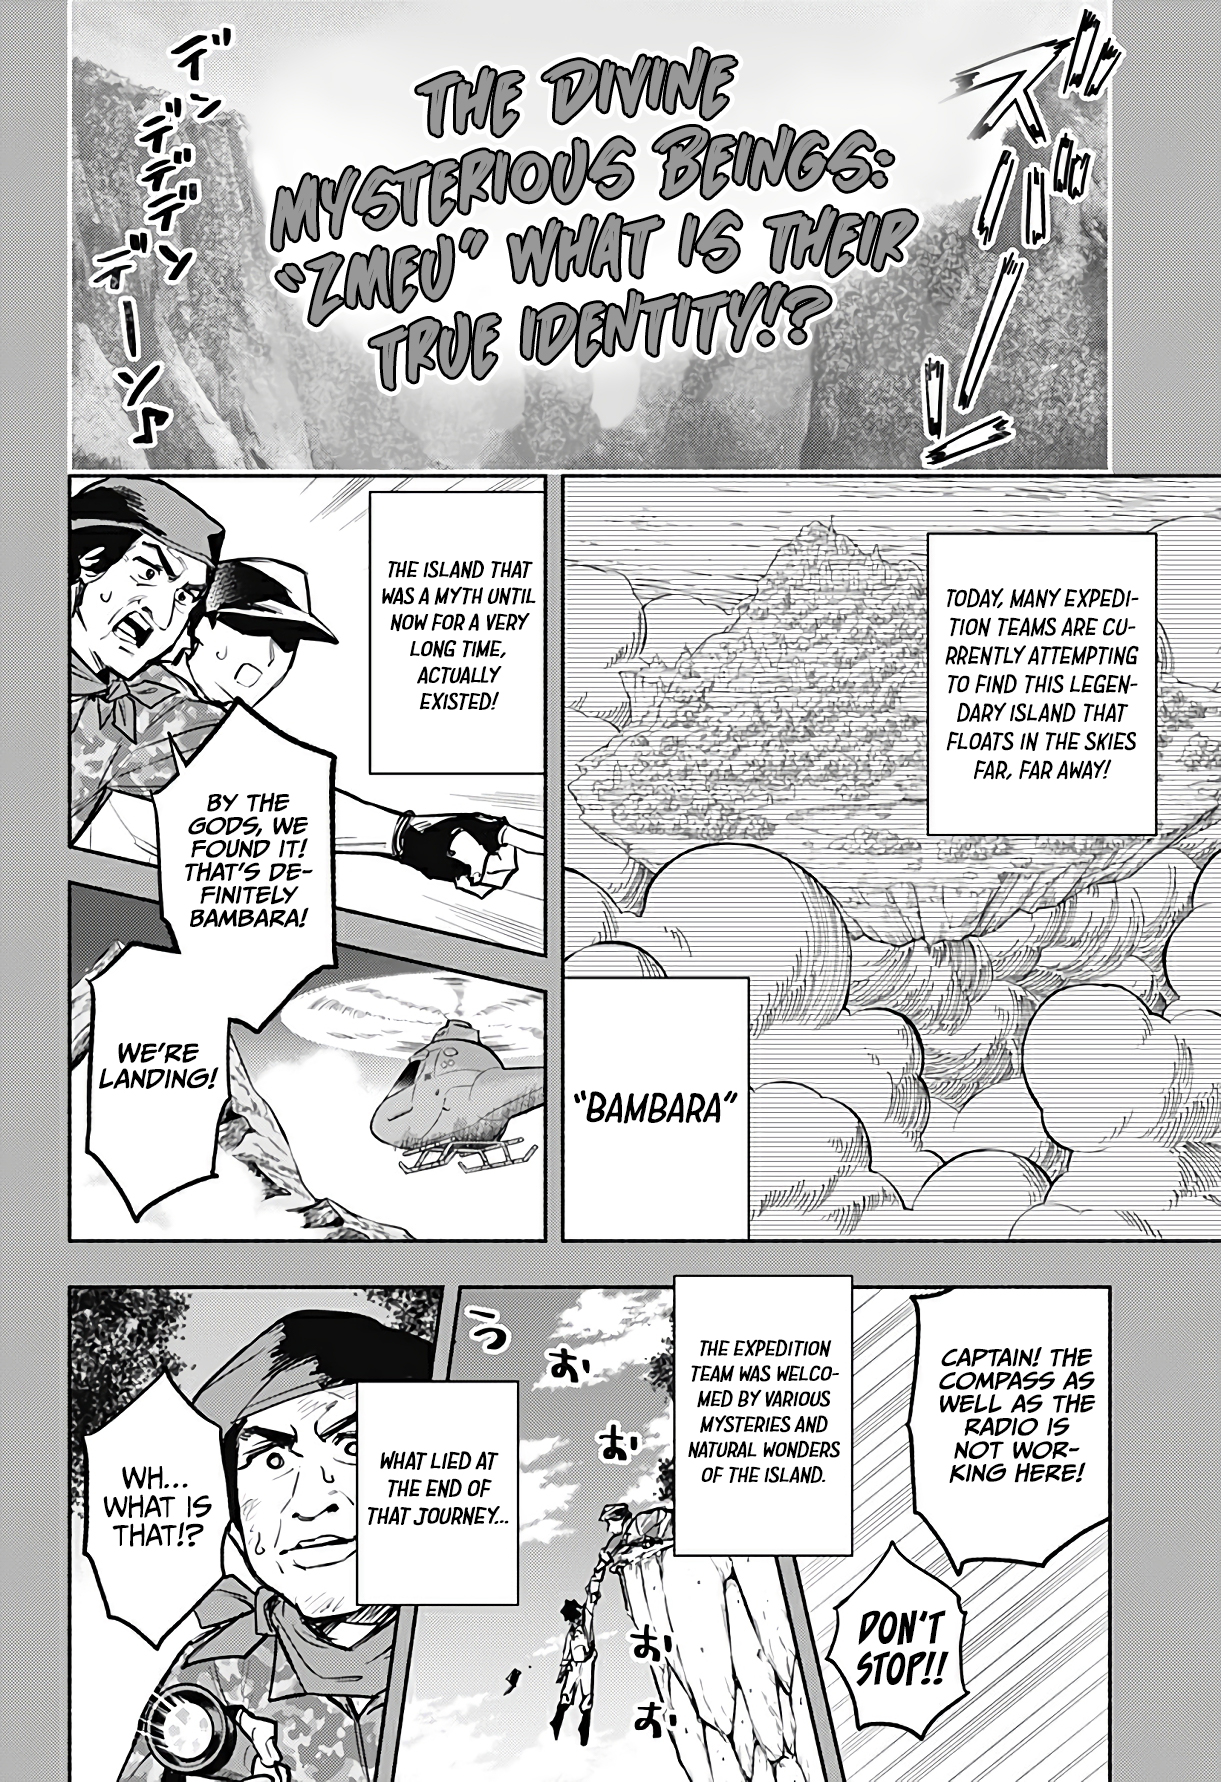 That Dragon (Exchange) Student Stands Out More Than Me - Page 3